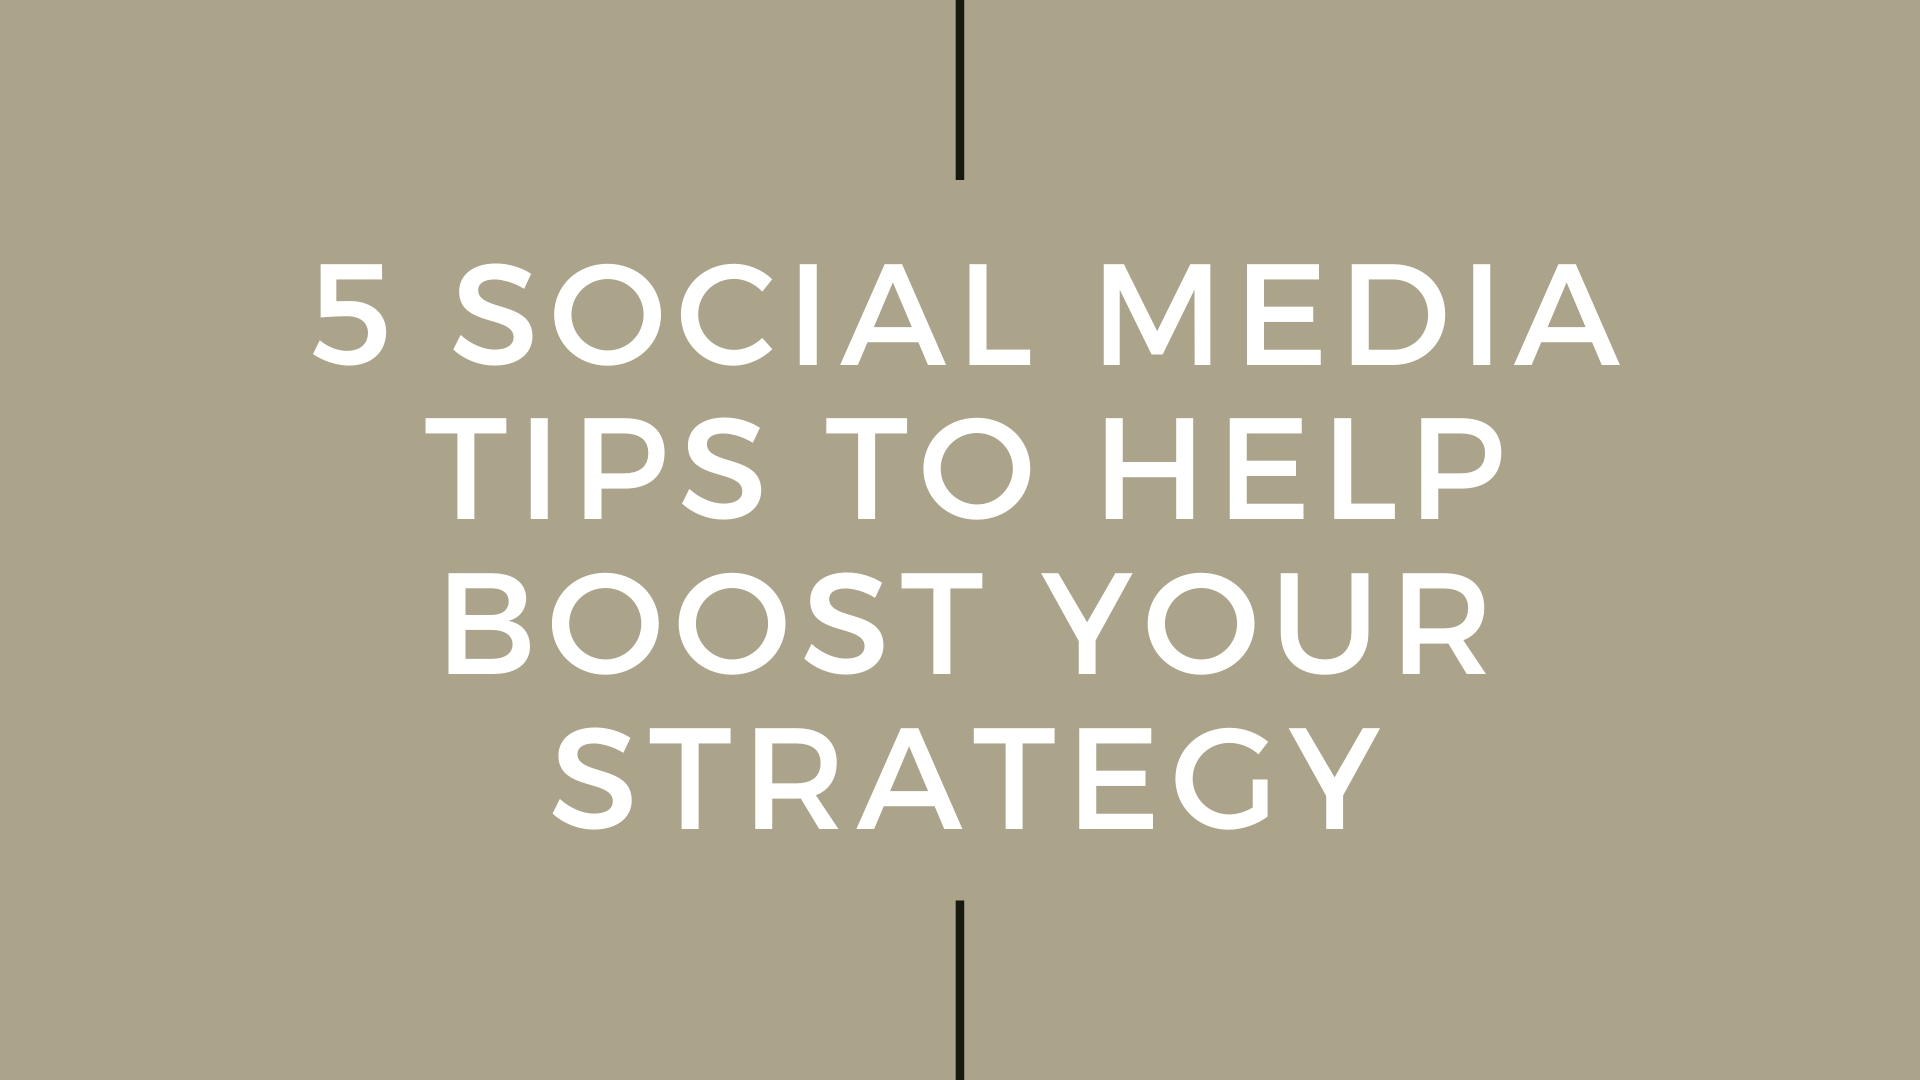 5 Social Media Tips to Help Boost Your Strategy